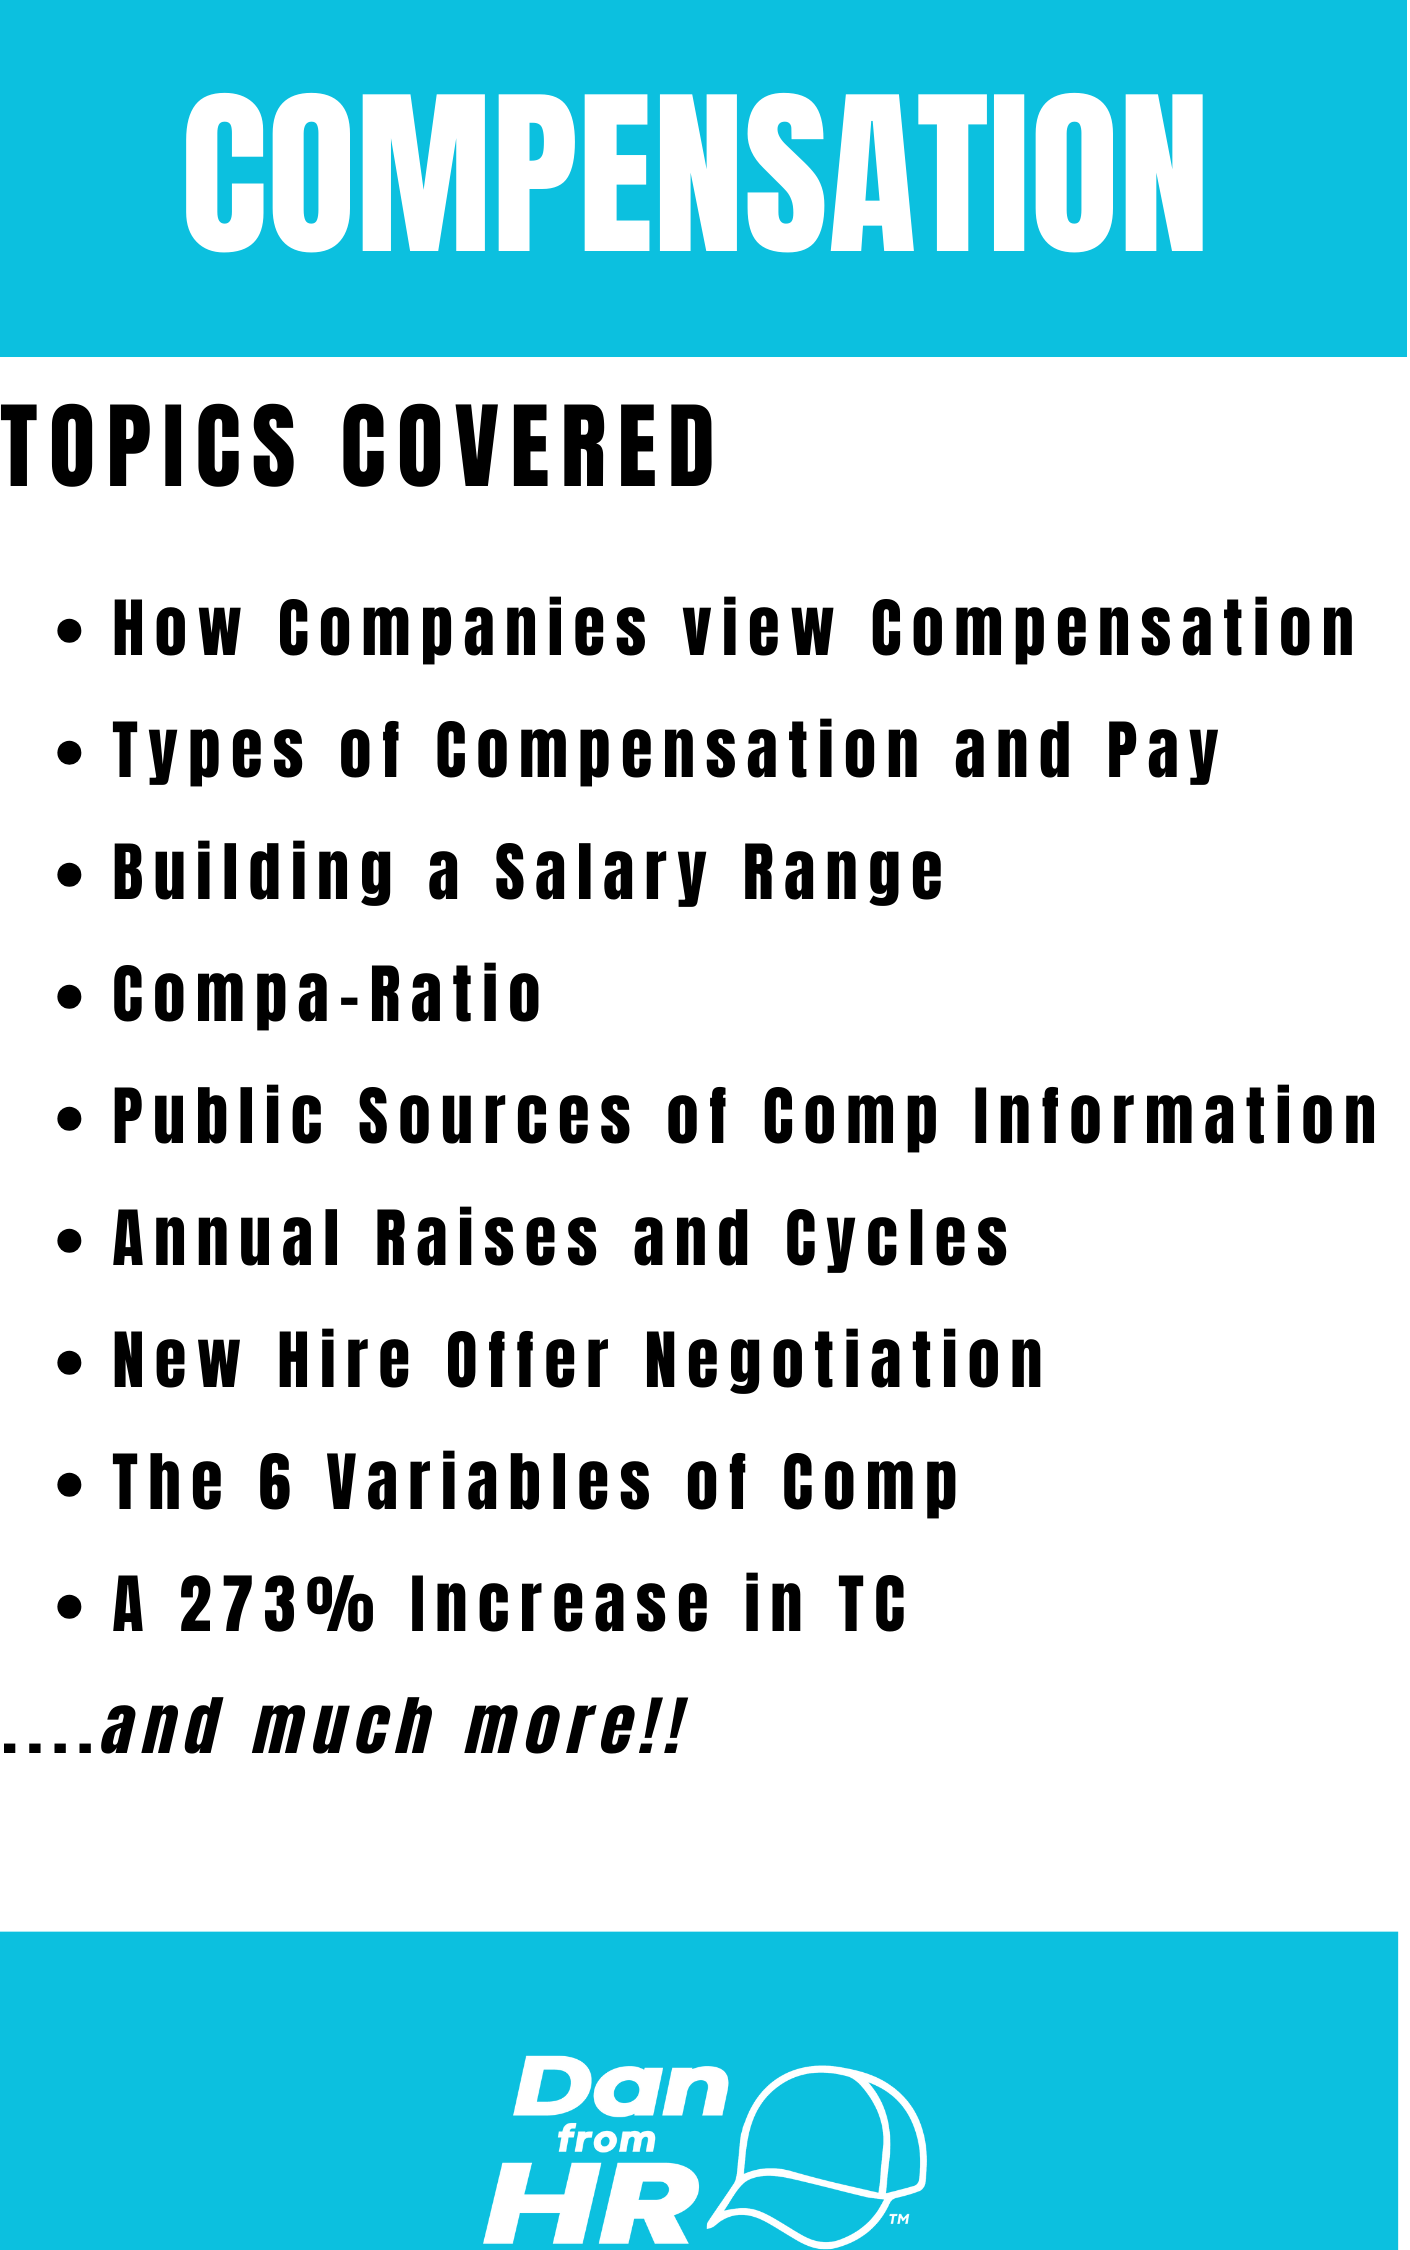 COMPENSATION-  GUIDE TO SALARIES AND FINANCIAL OPTIMIZATION